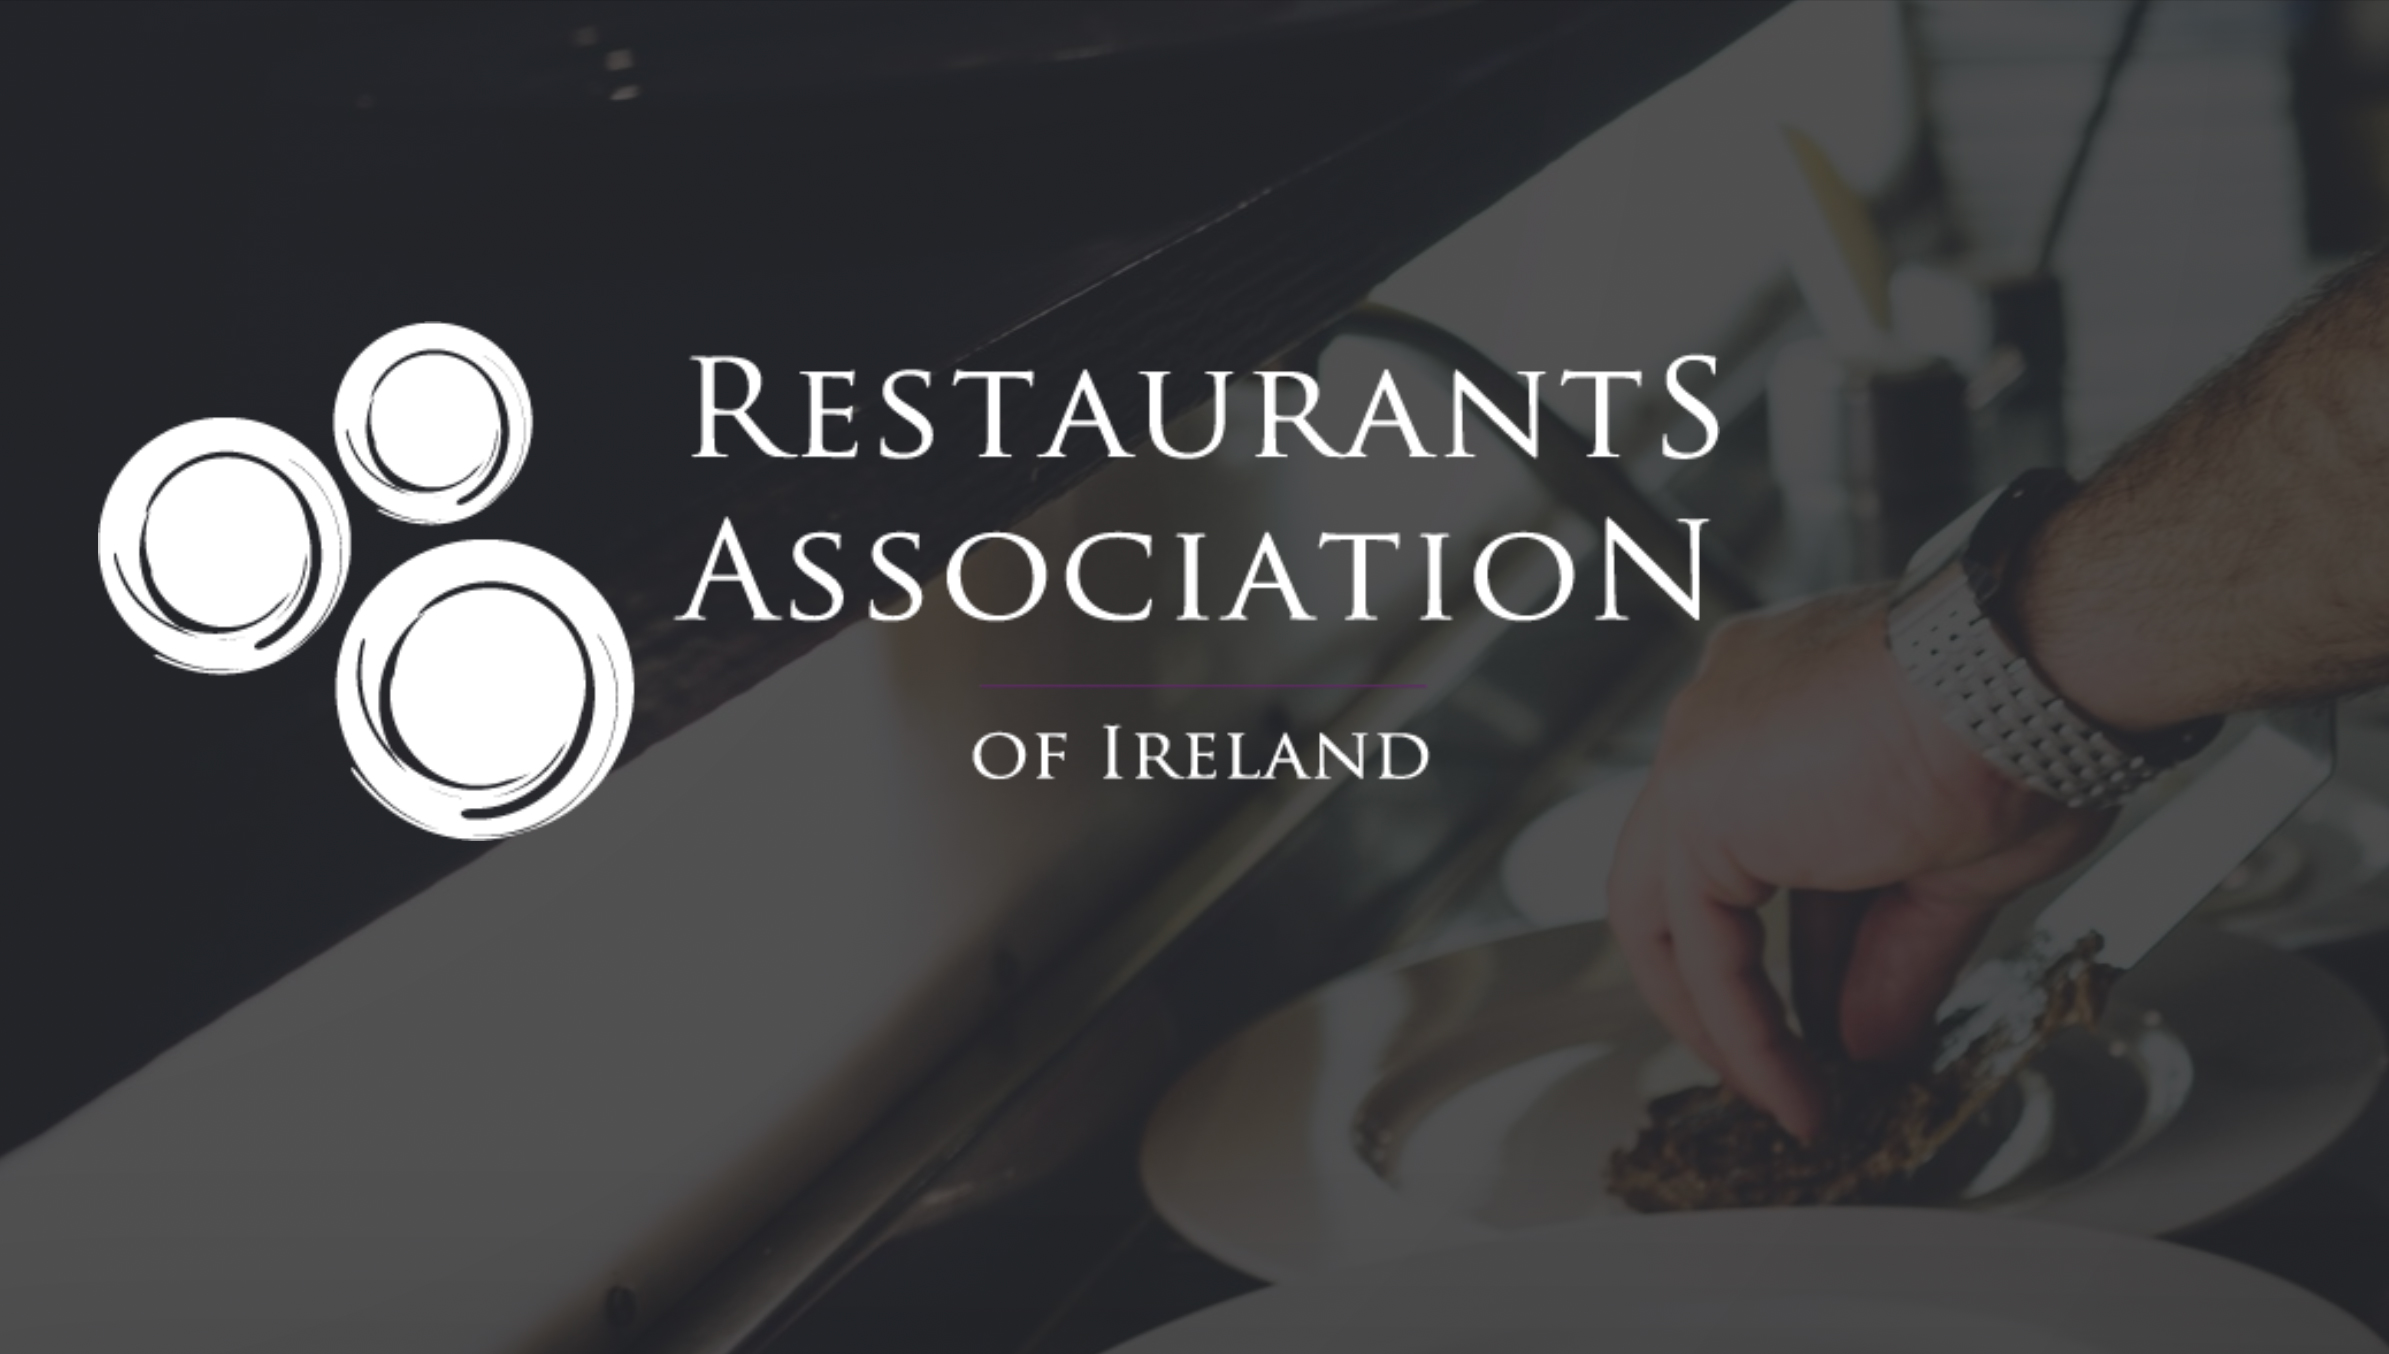 Restaurants Association of Ireland welcomes the extension of the 9% Hospitality VAT Rate for the next 6 months